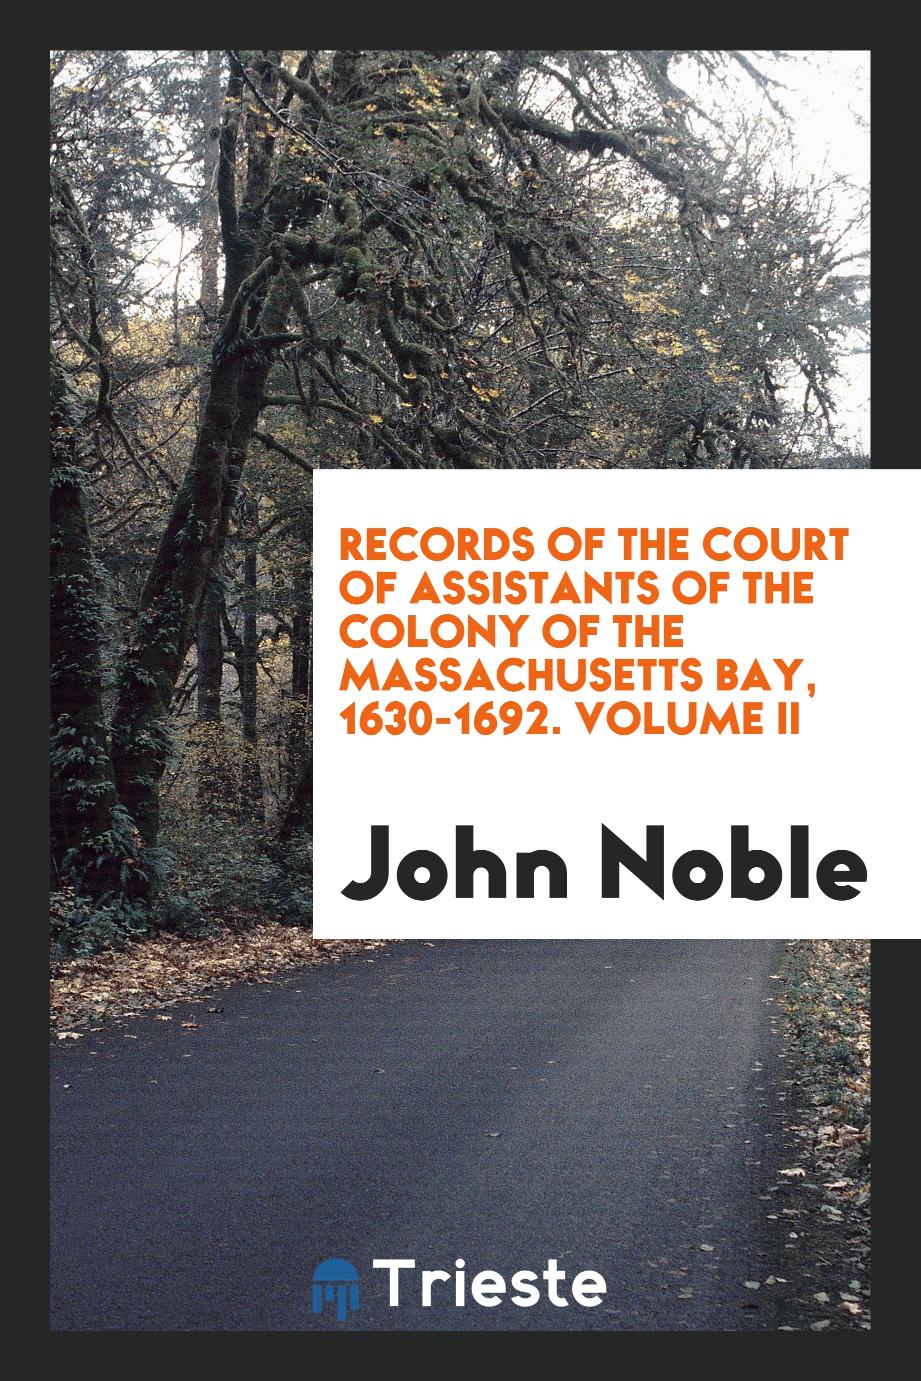 Records of the Court of Assistants of the Colony of the Massachusetts Bay, 1630-1692. Volume II